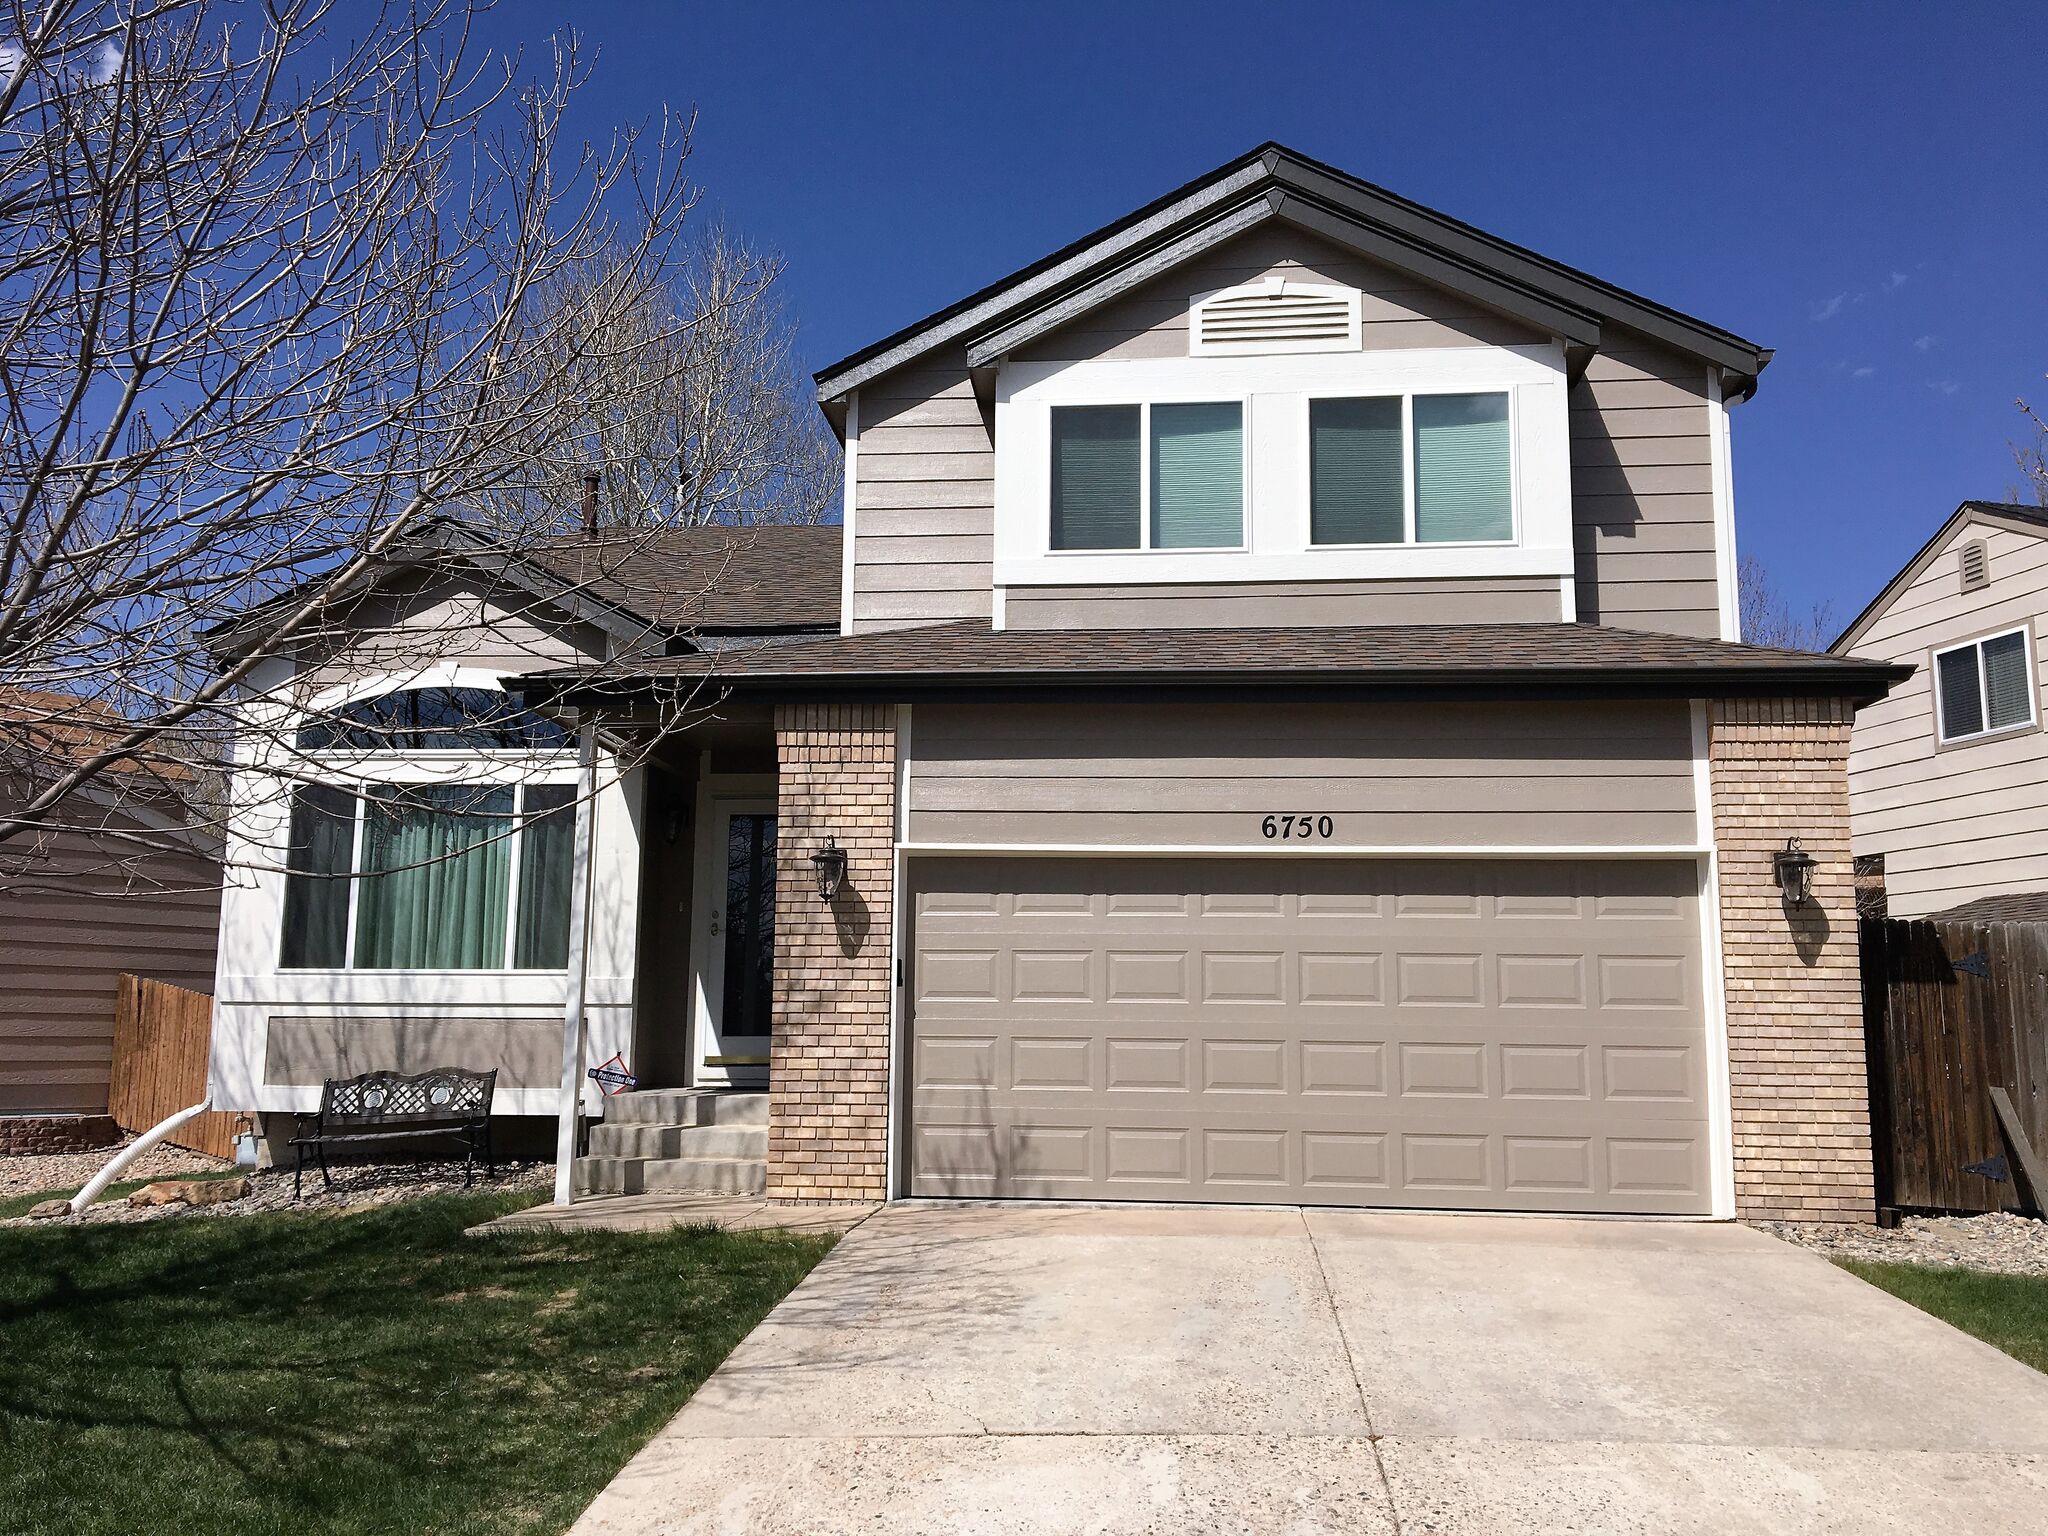 Exterior Painting by CertaPro house painters in Colorado Springs, CO